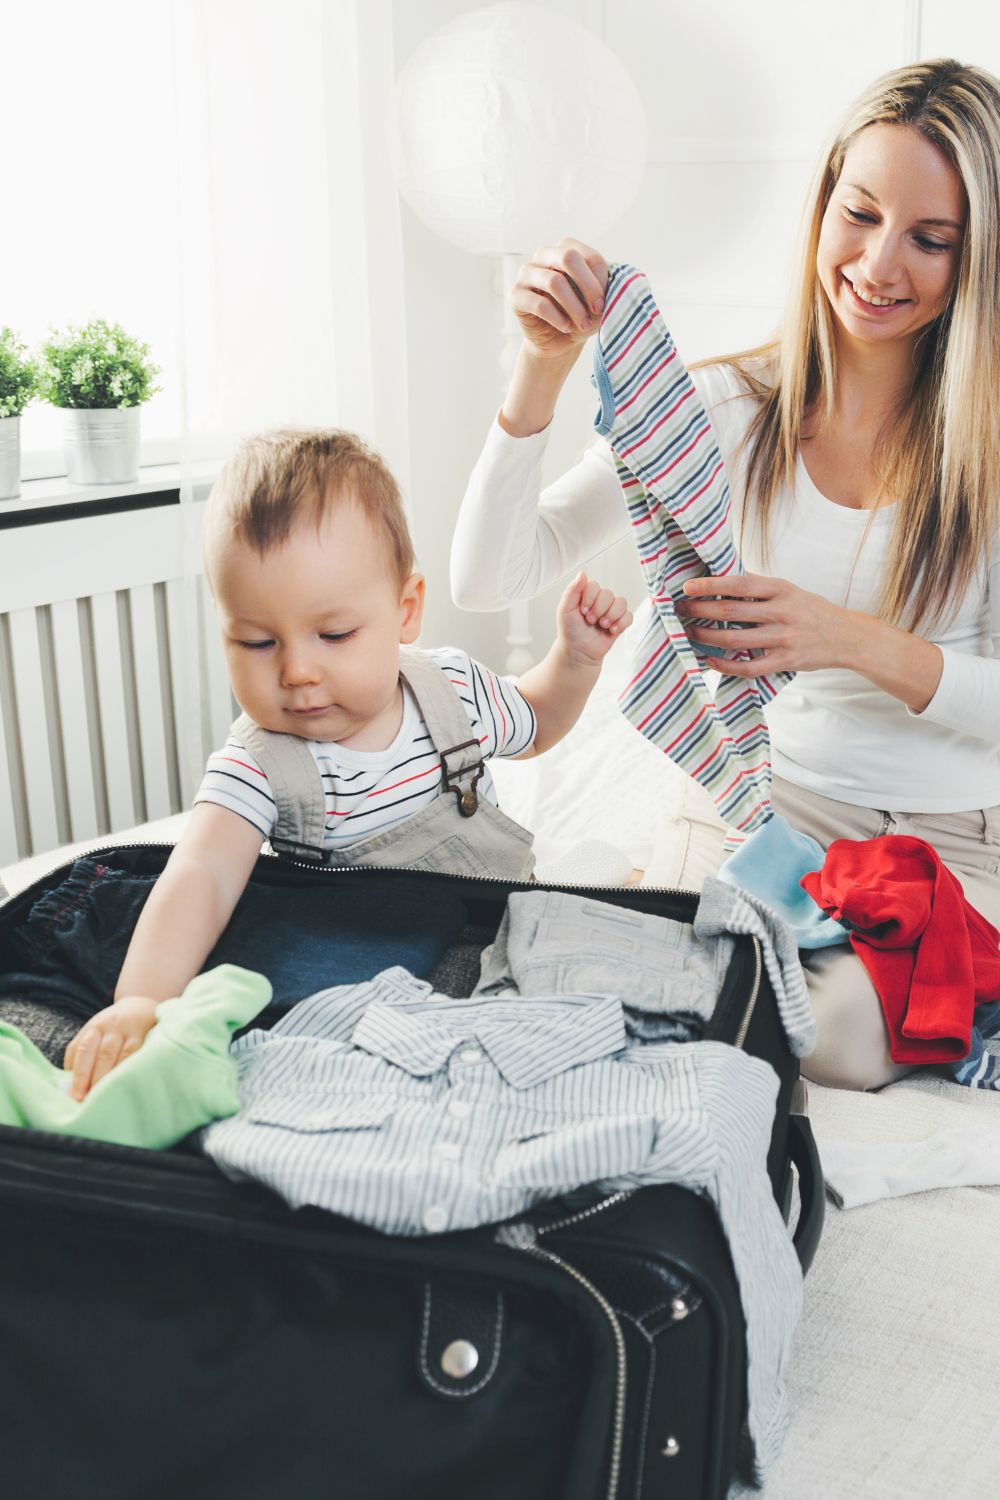 Tips For Parents Who Want To Travel With Their Kids